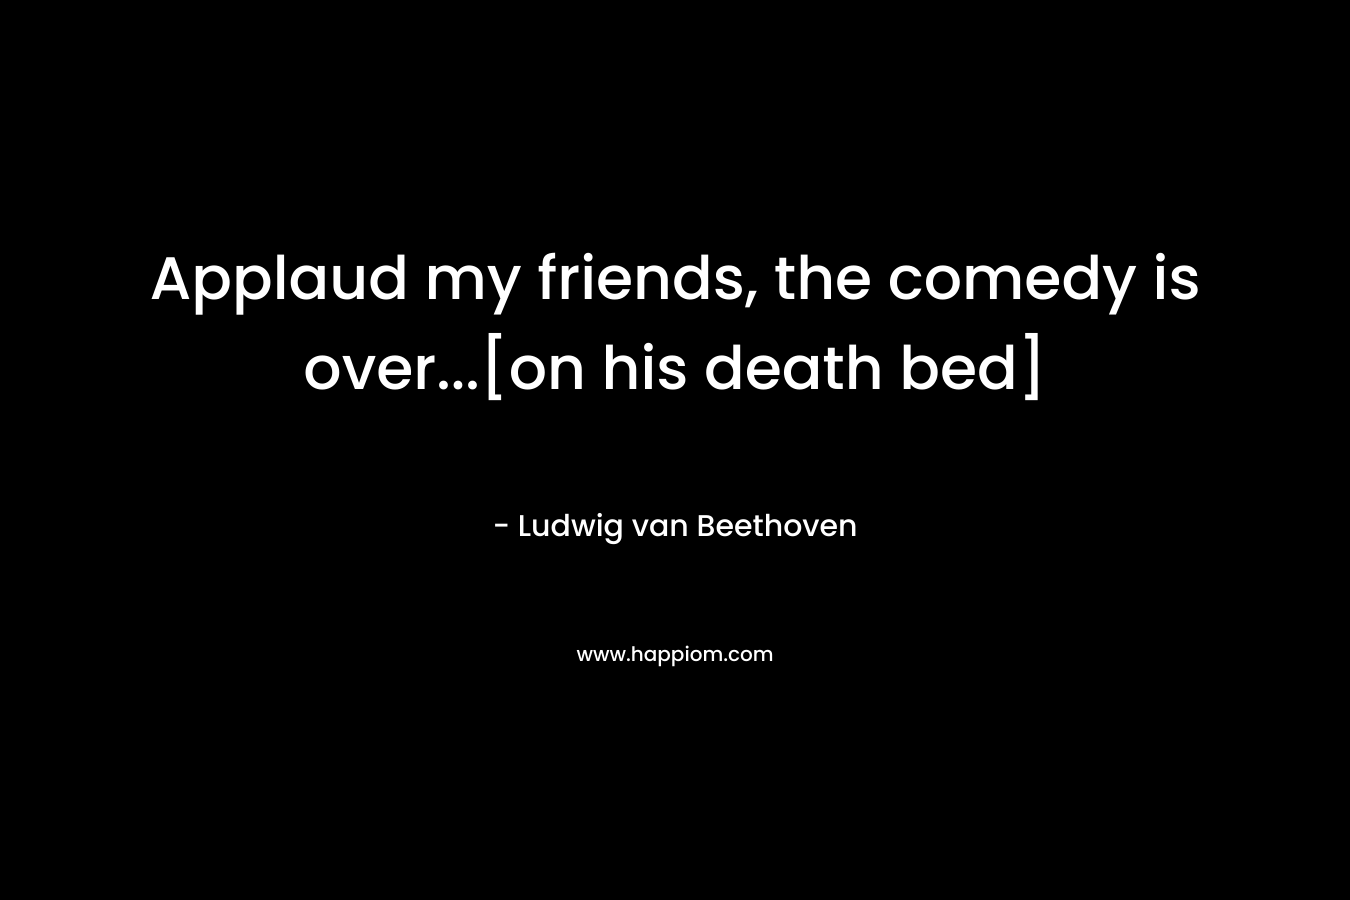 Applaud my friends, the comedy is over...[on his death bed]